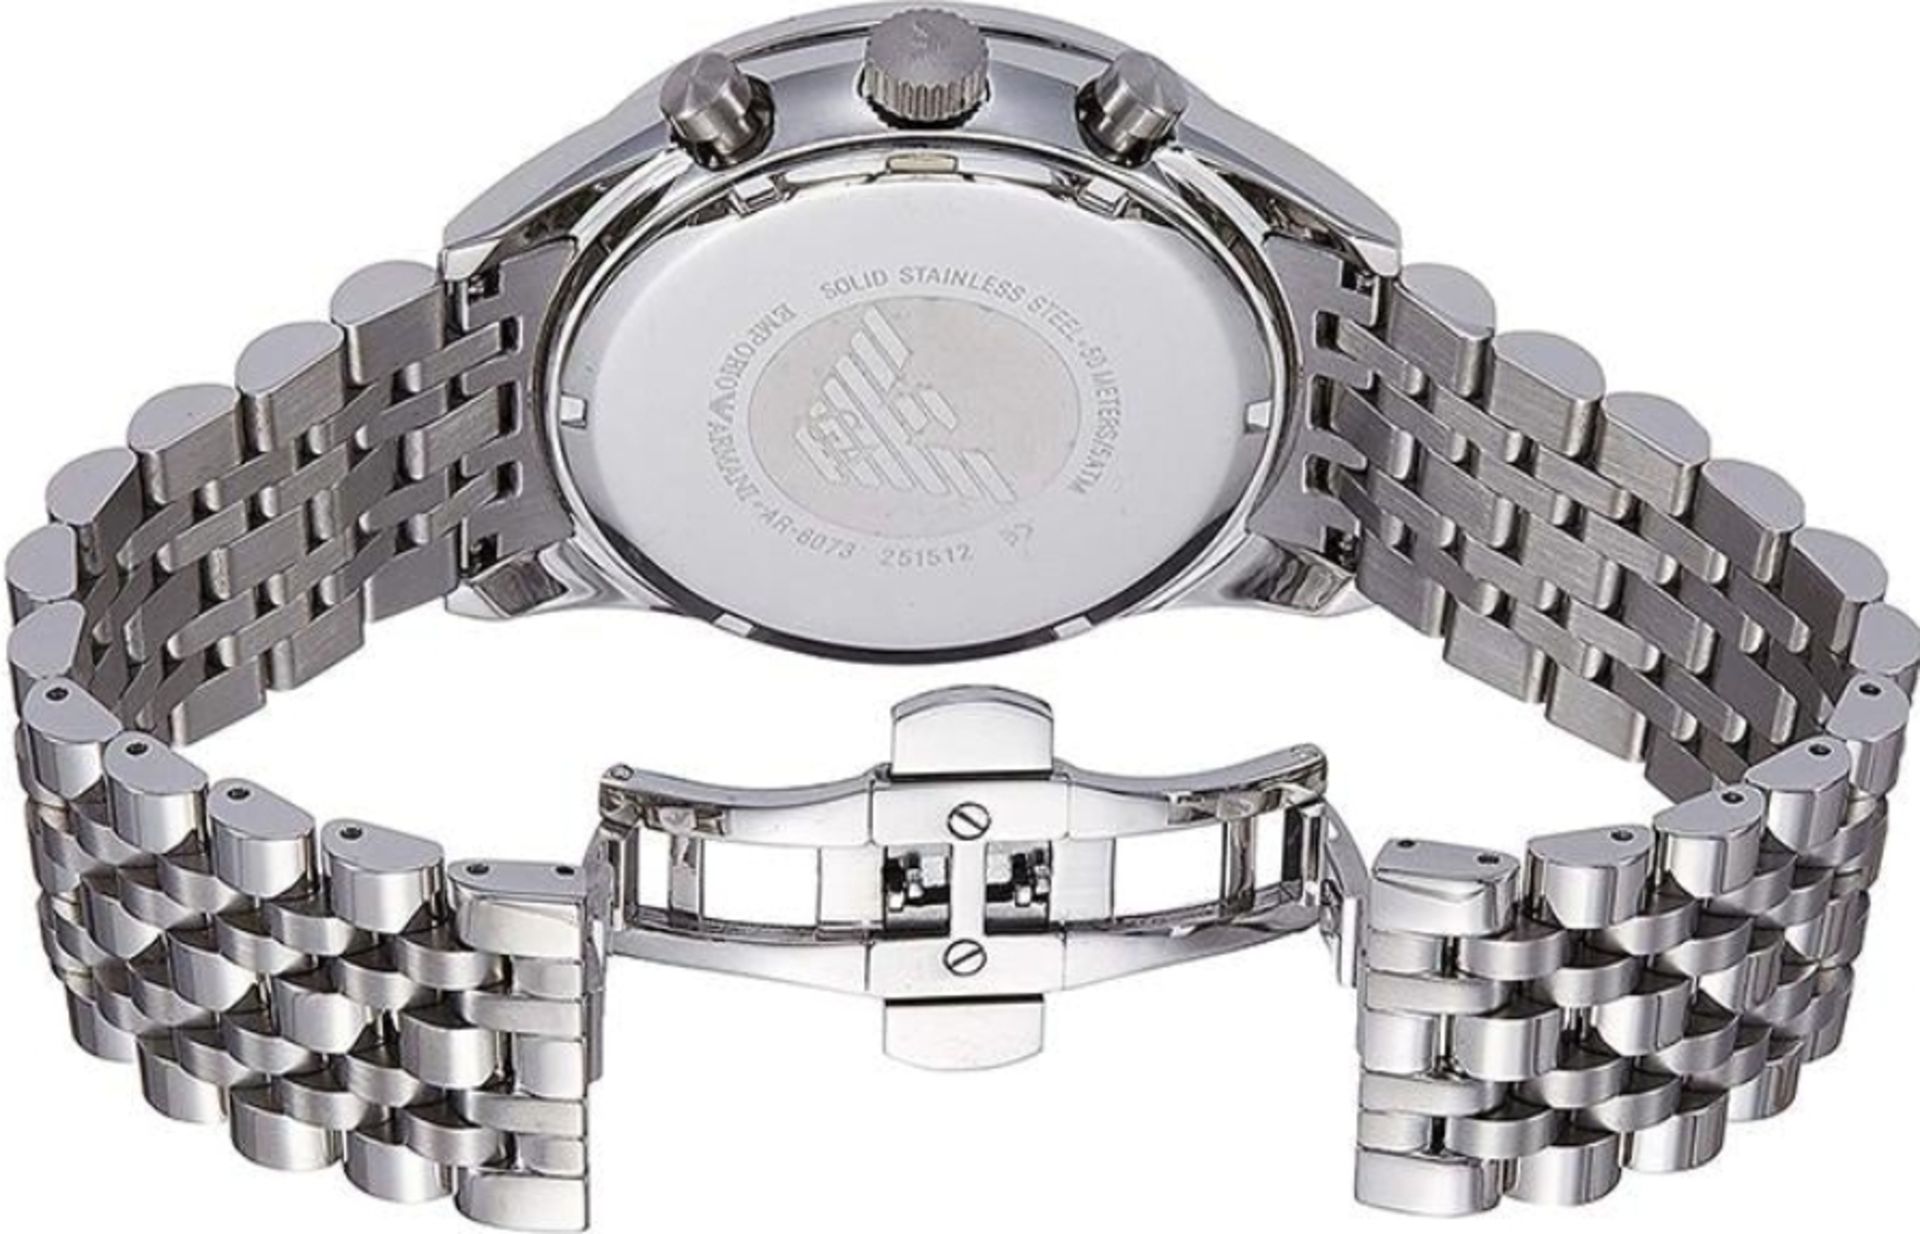 AR6073 Emporio Armani Men's Sportivo Silver Stainless Steel Chronograph Watch - Image 7 of 8